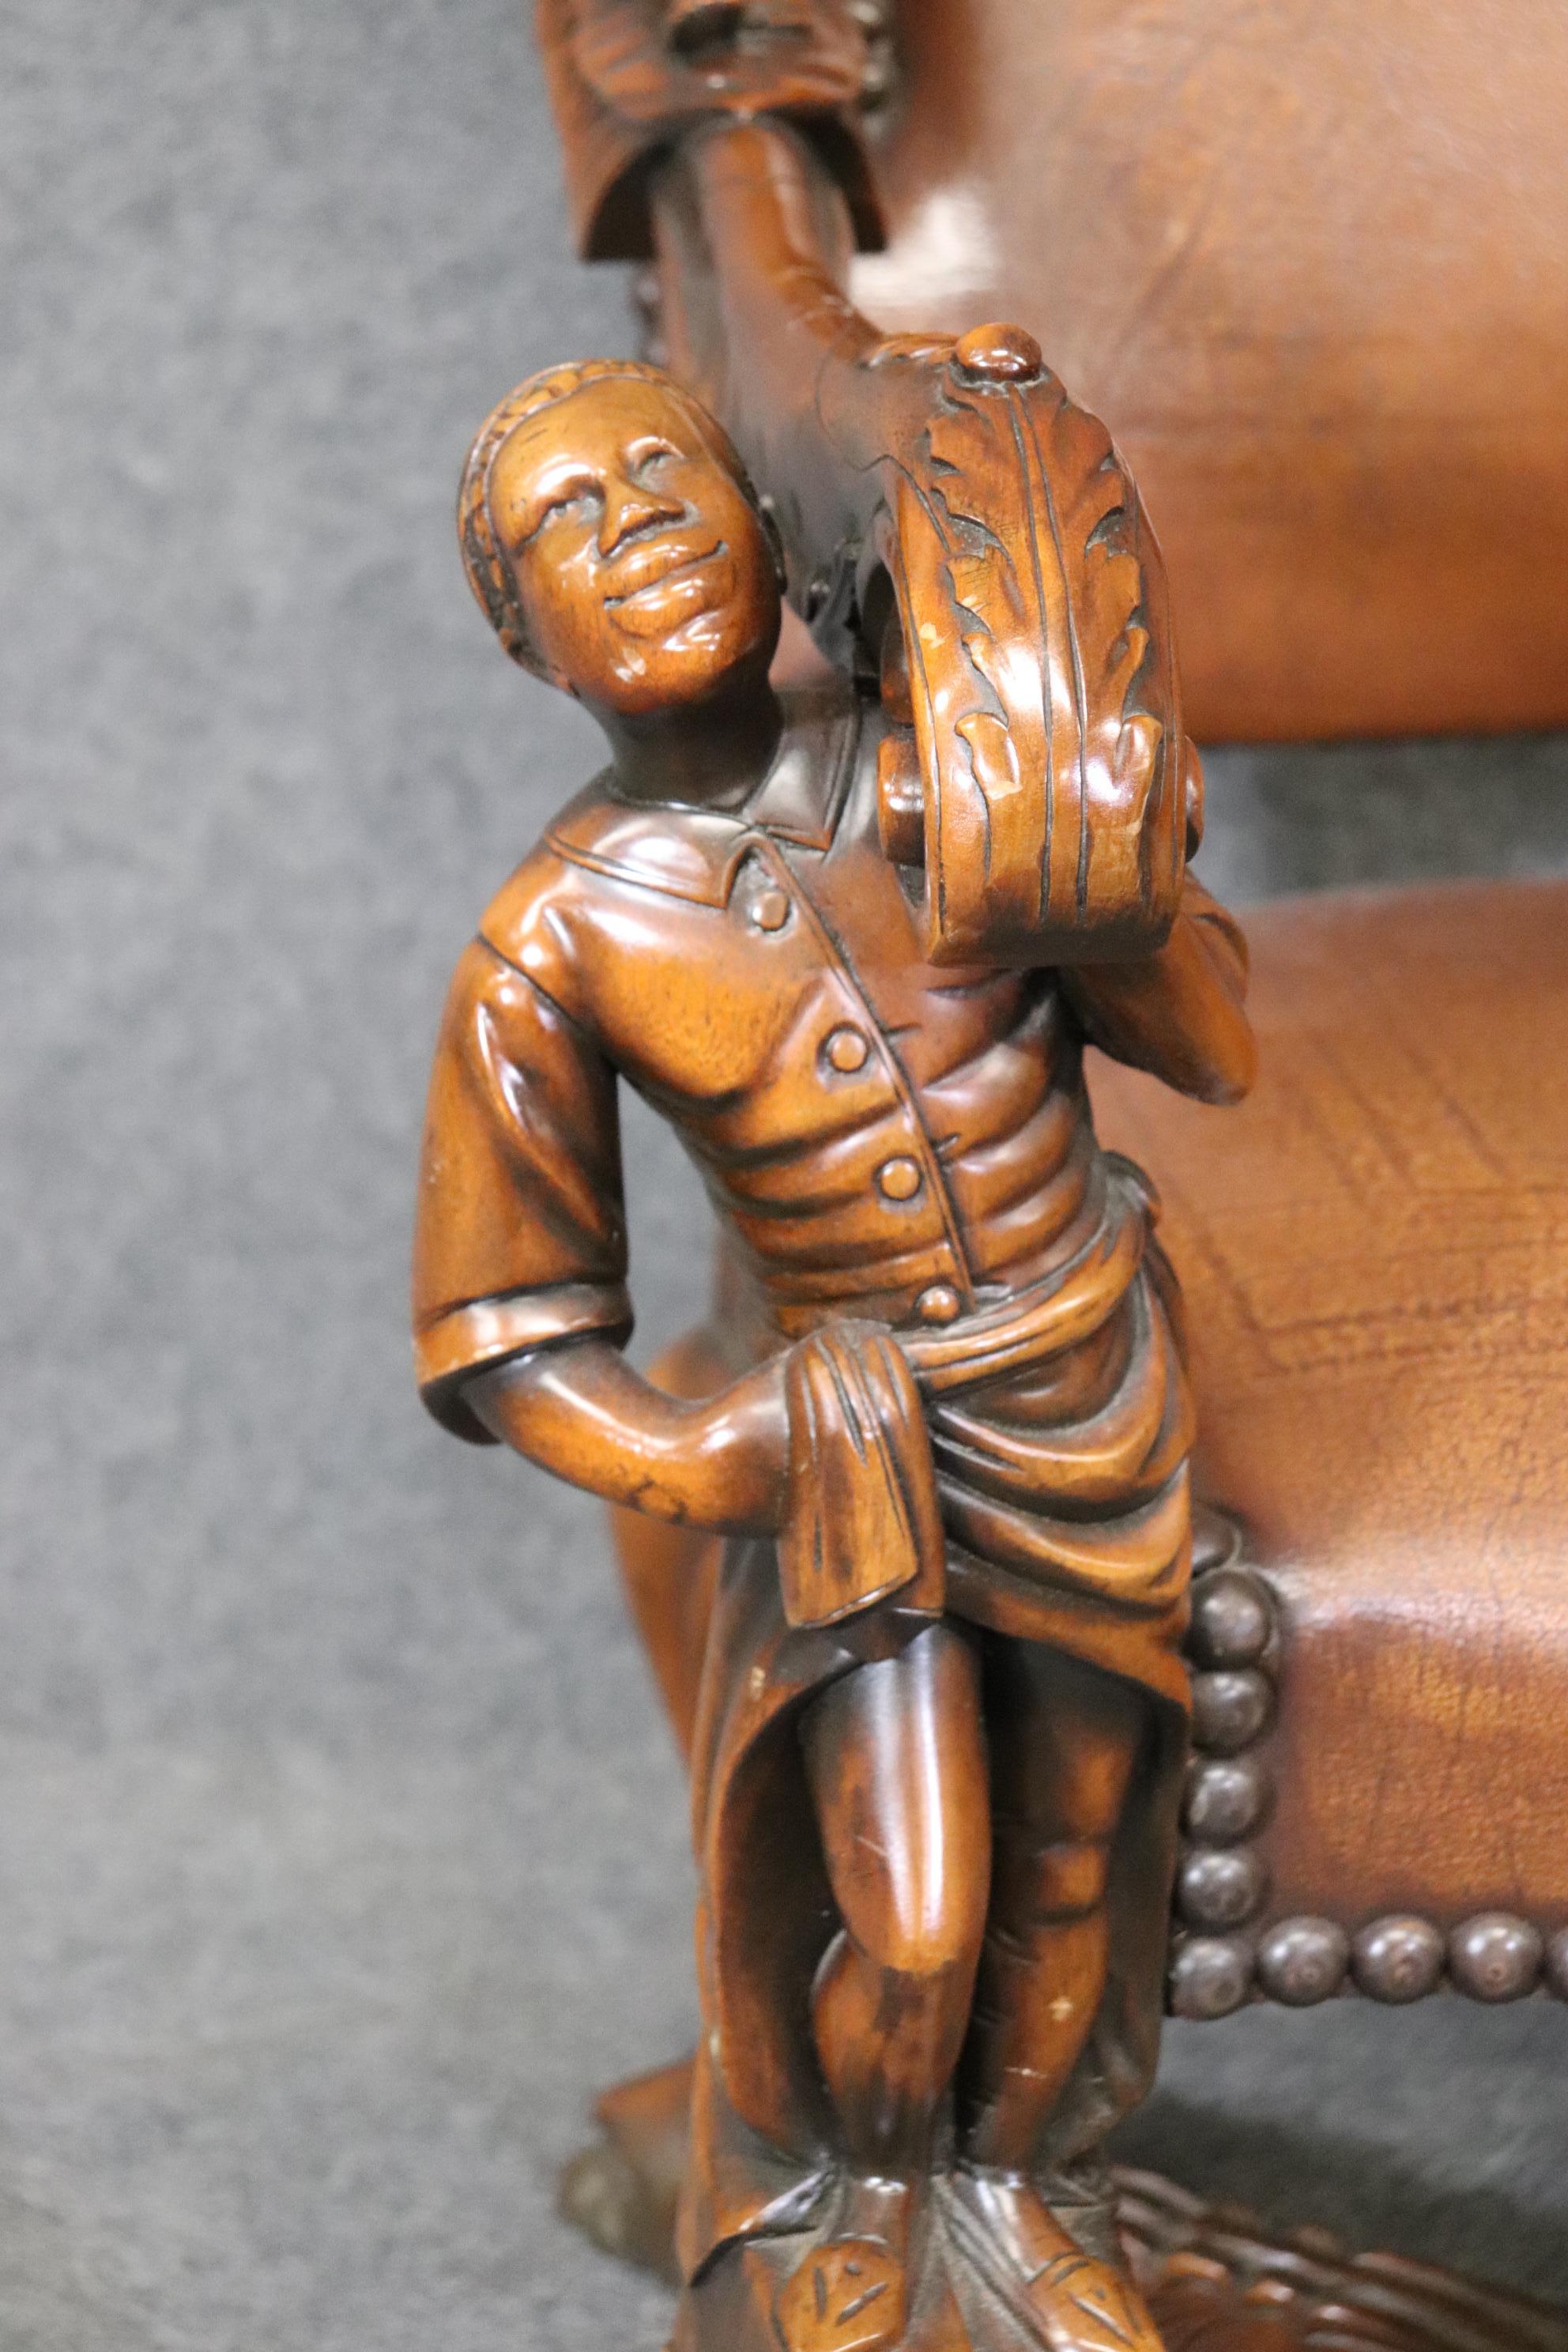 This is a superb replica of an Andrea Brustolon 1700s era figural chair. The chair has gorgeous embossed leather and fantastic carved figures. The chair is very large and rather heavy. The chair measures 45.25 tall x 31 wide x 31 deep x seat height